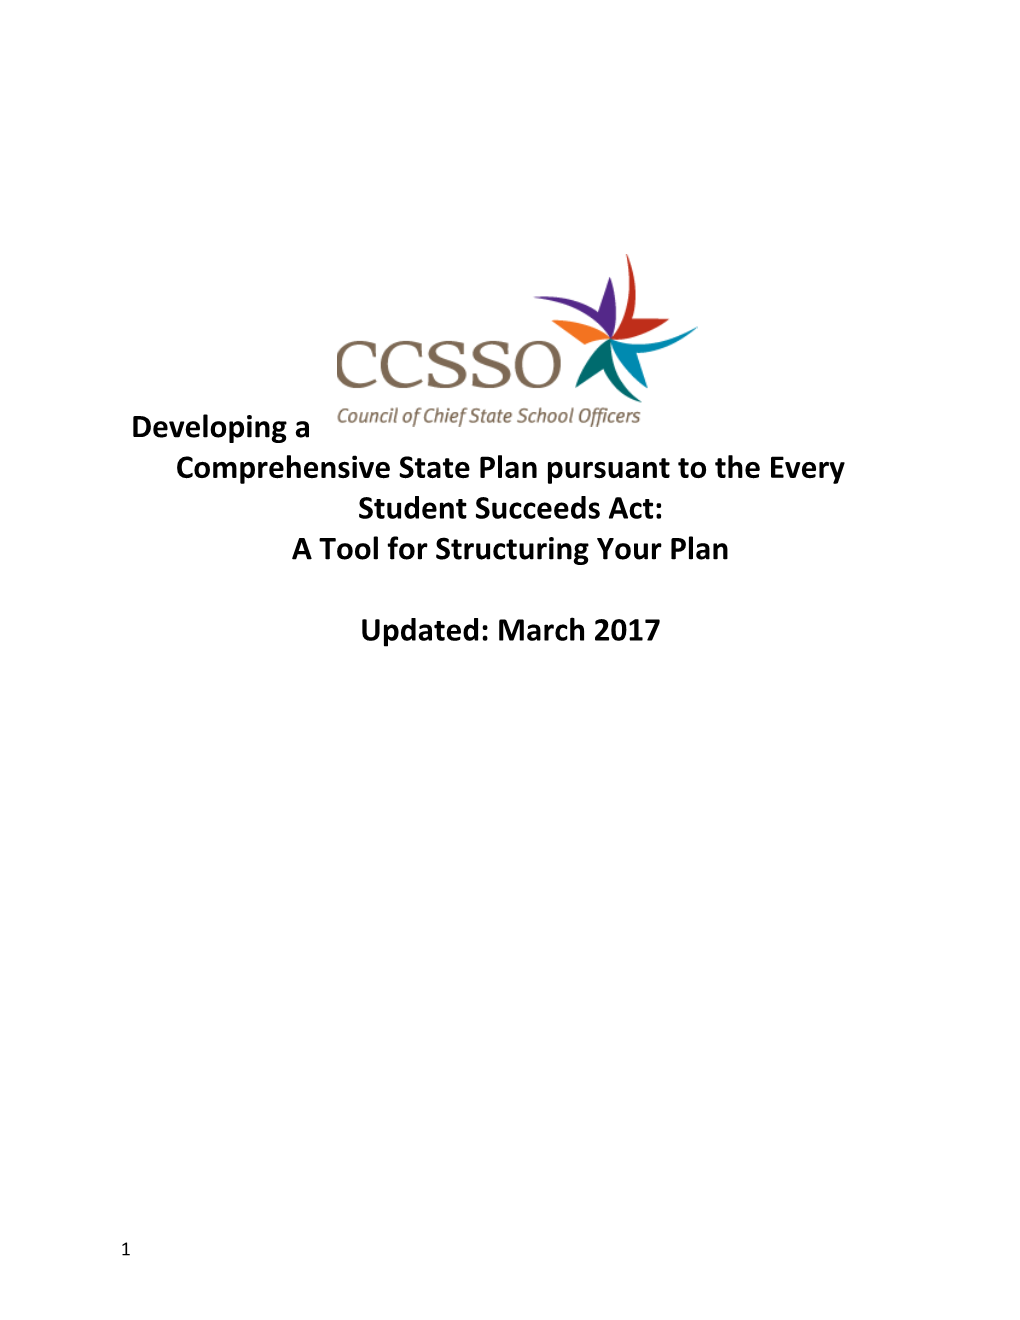 Developing a Comprehensive State Plan Pursuant to the Every Student Succeeds Act